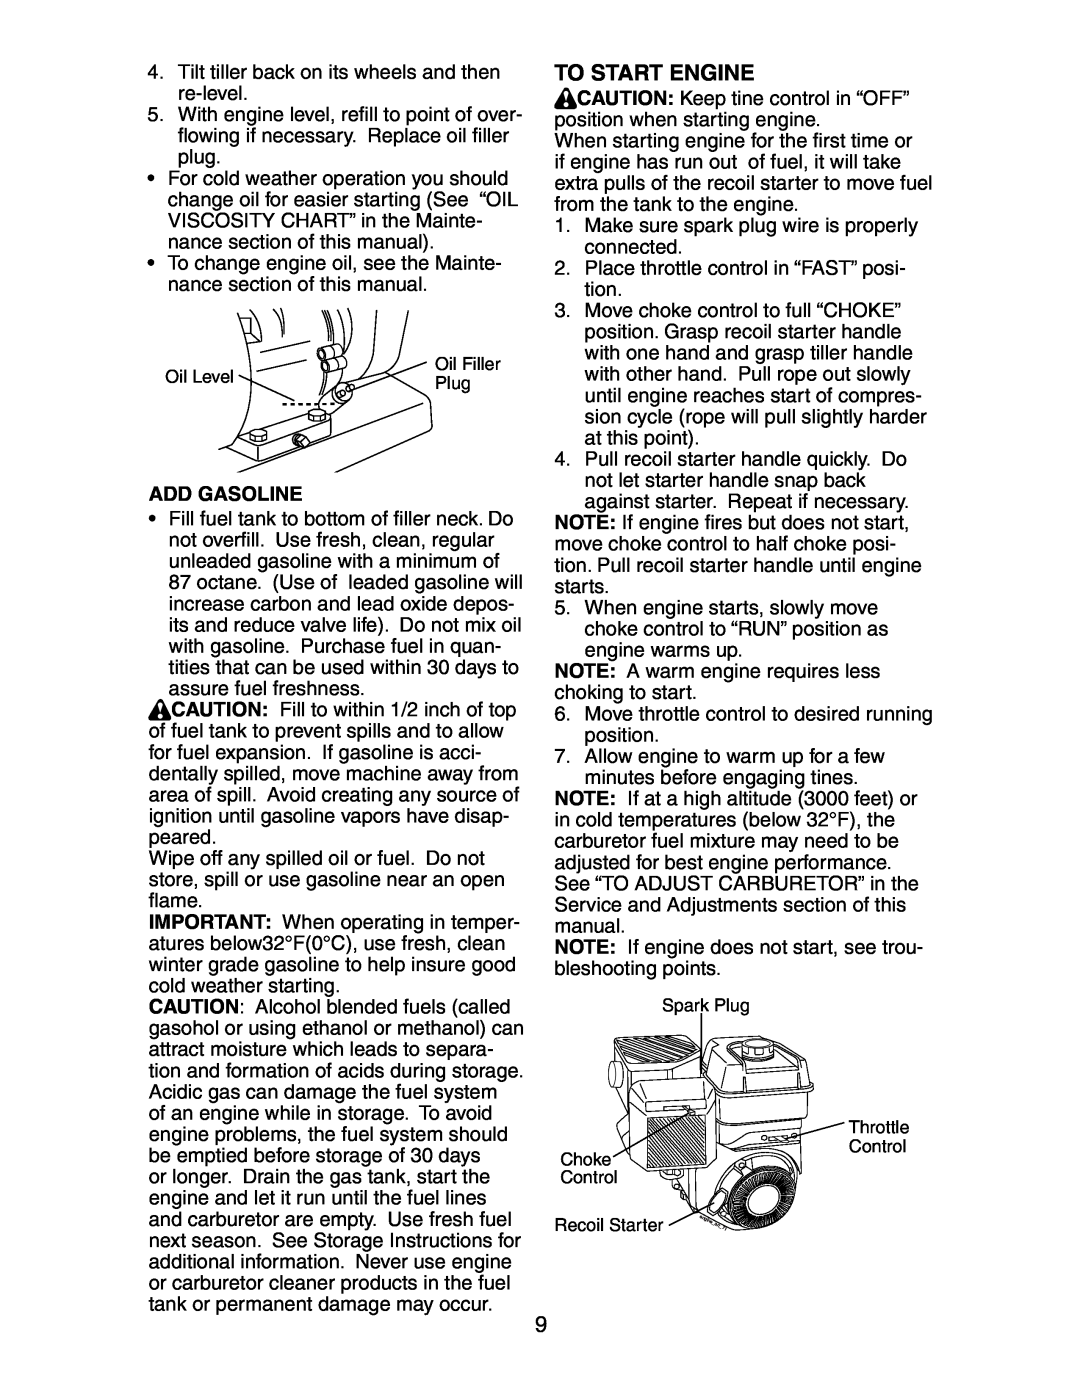 Sears 917.29149 owner manual To Start Engine, Add Gasoline 